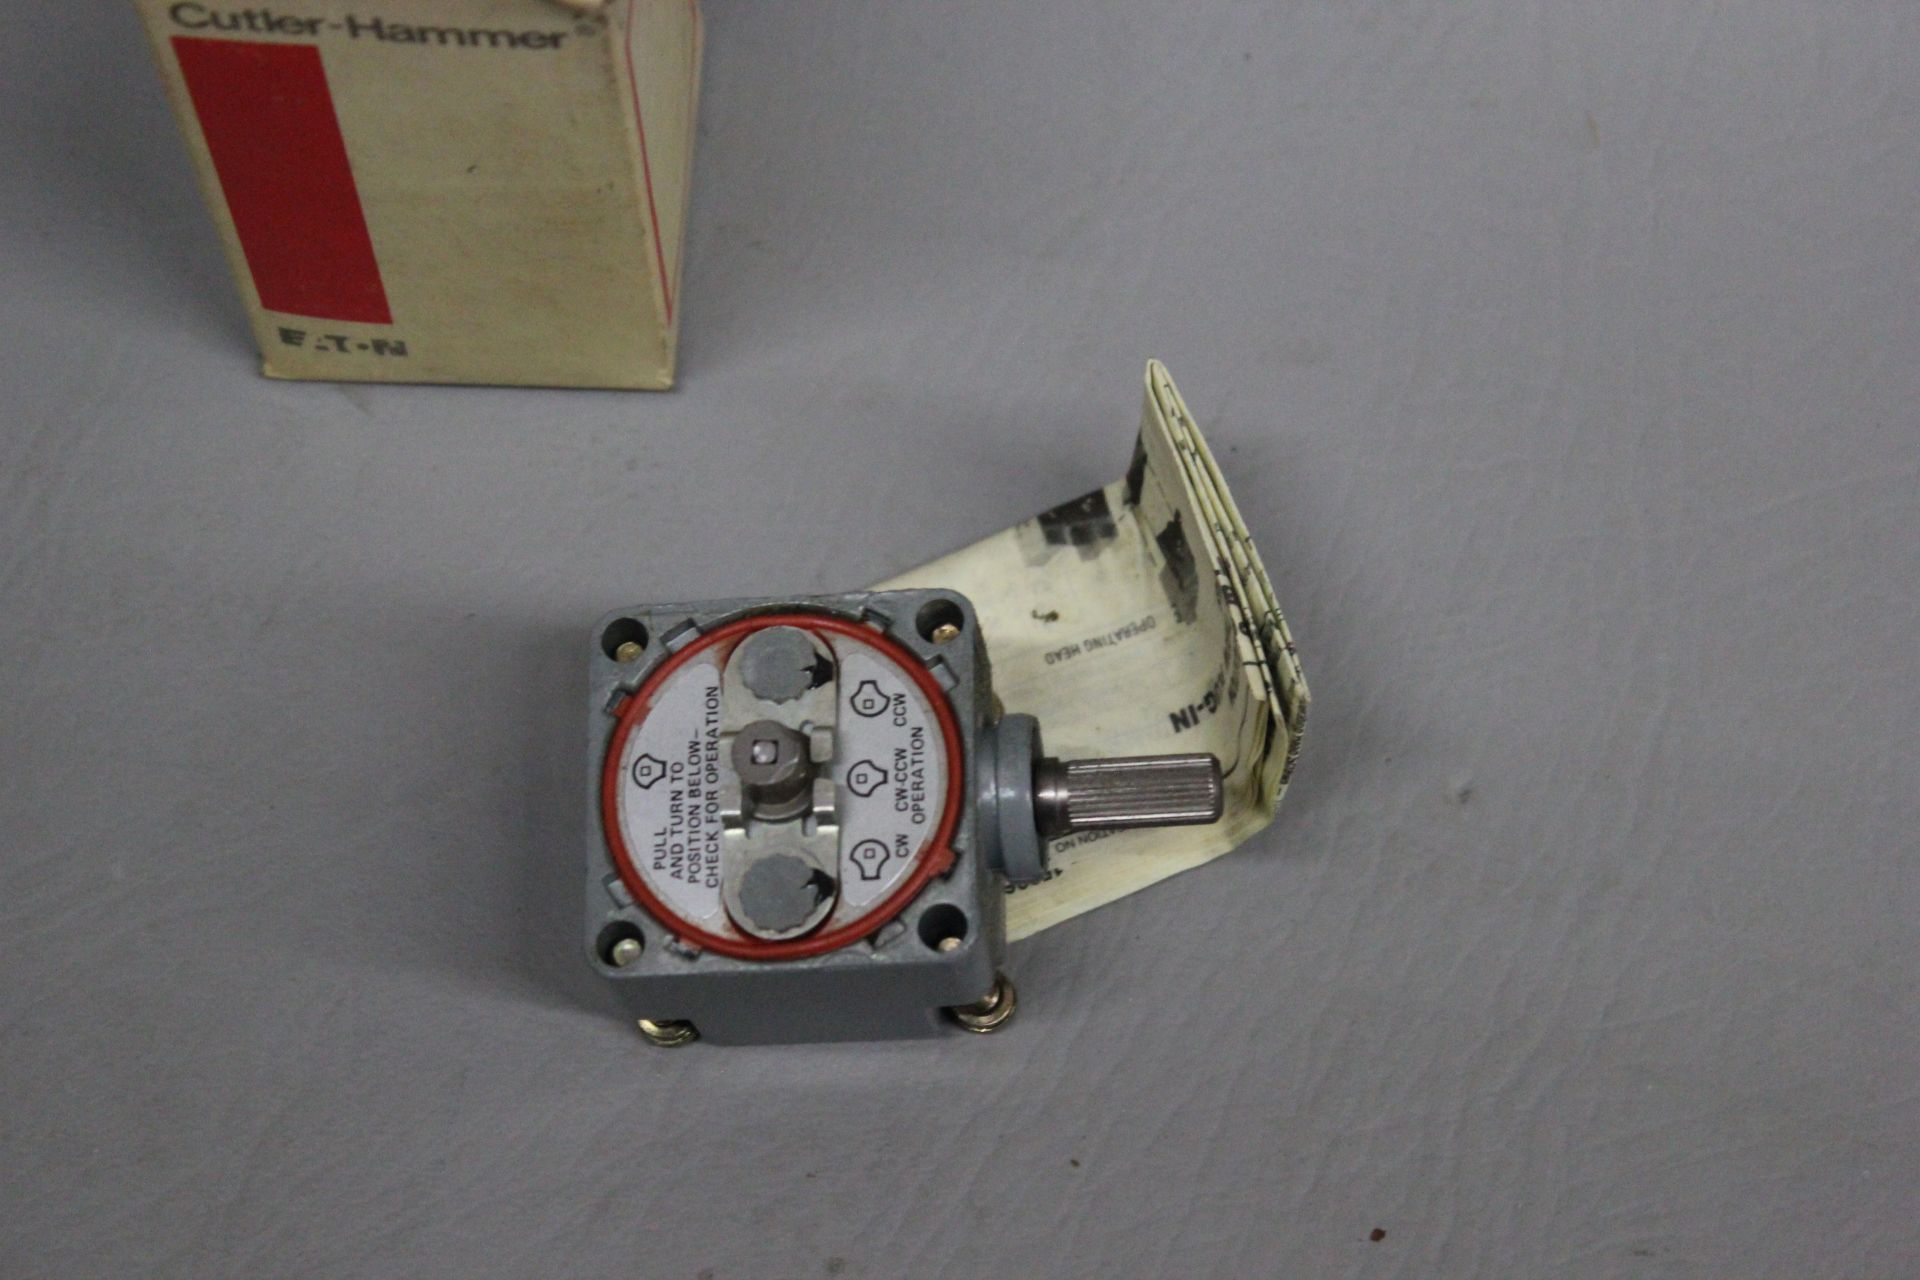 NEW OLD STOCK CUTLER HAMMER LIMIT SWITCH OPERATING HEAD - Image 3 of 3